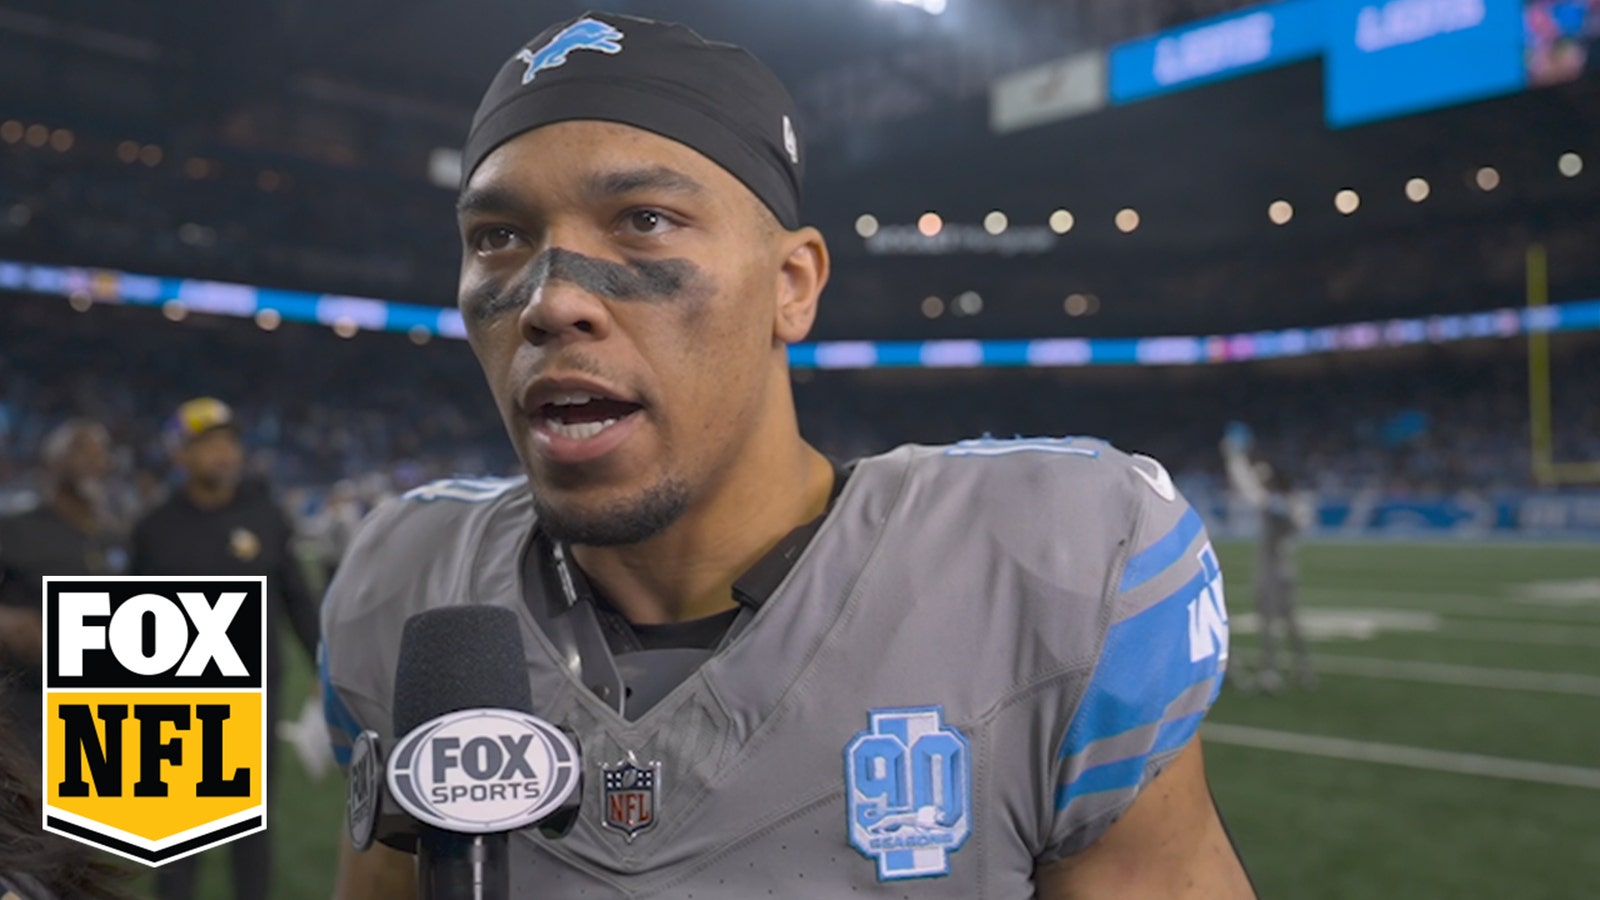 Amon-Ra St. Brown after Lions' win over Vikings: "On to the playoffs"